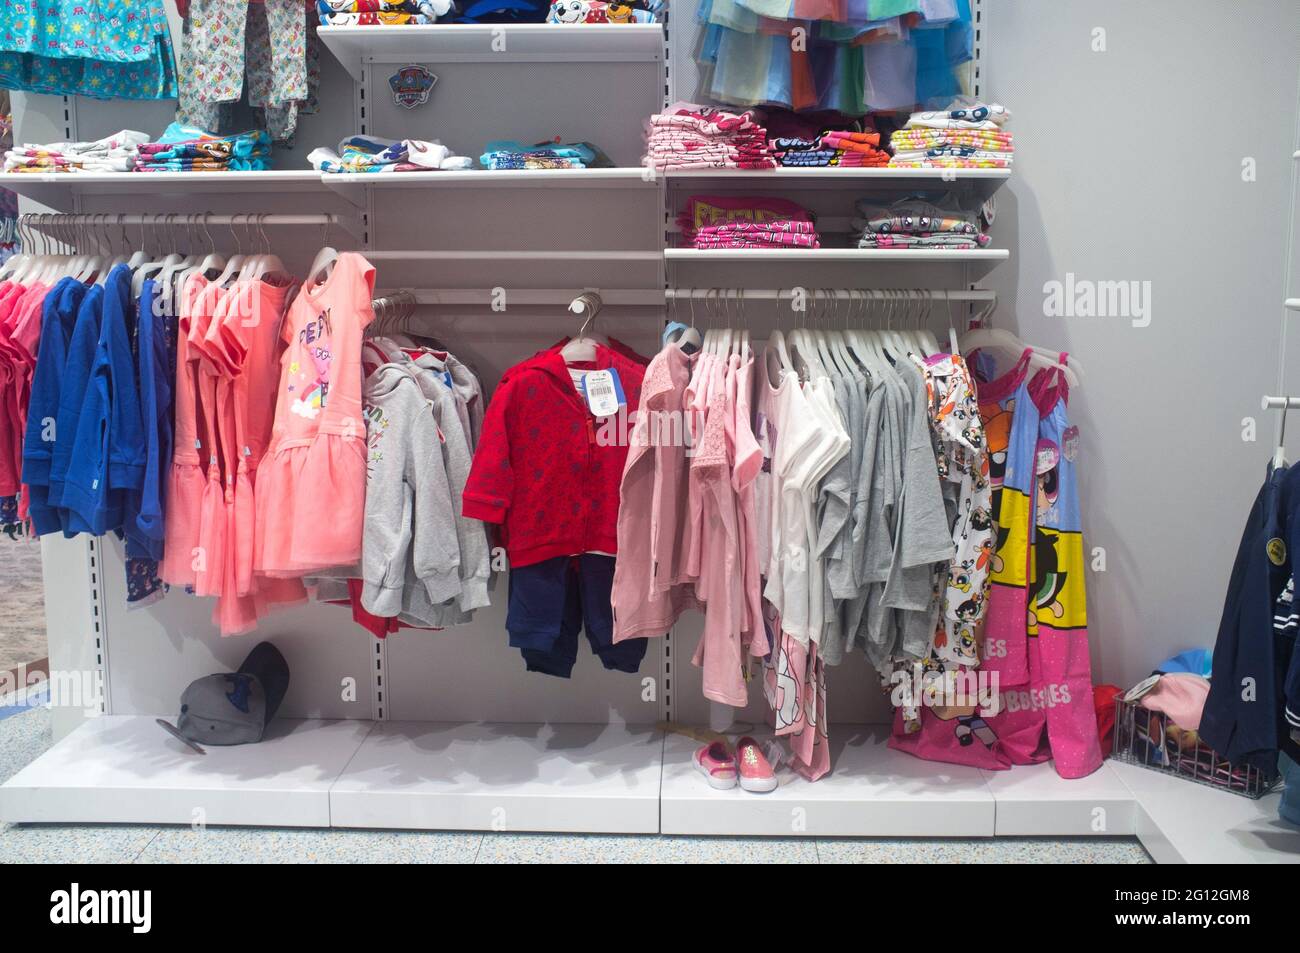 Spain, Badajoz - April 14th, 2018: Multicolored children clothing on the shelves of department store. Stock Photo